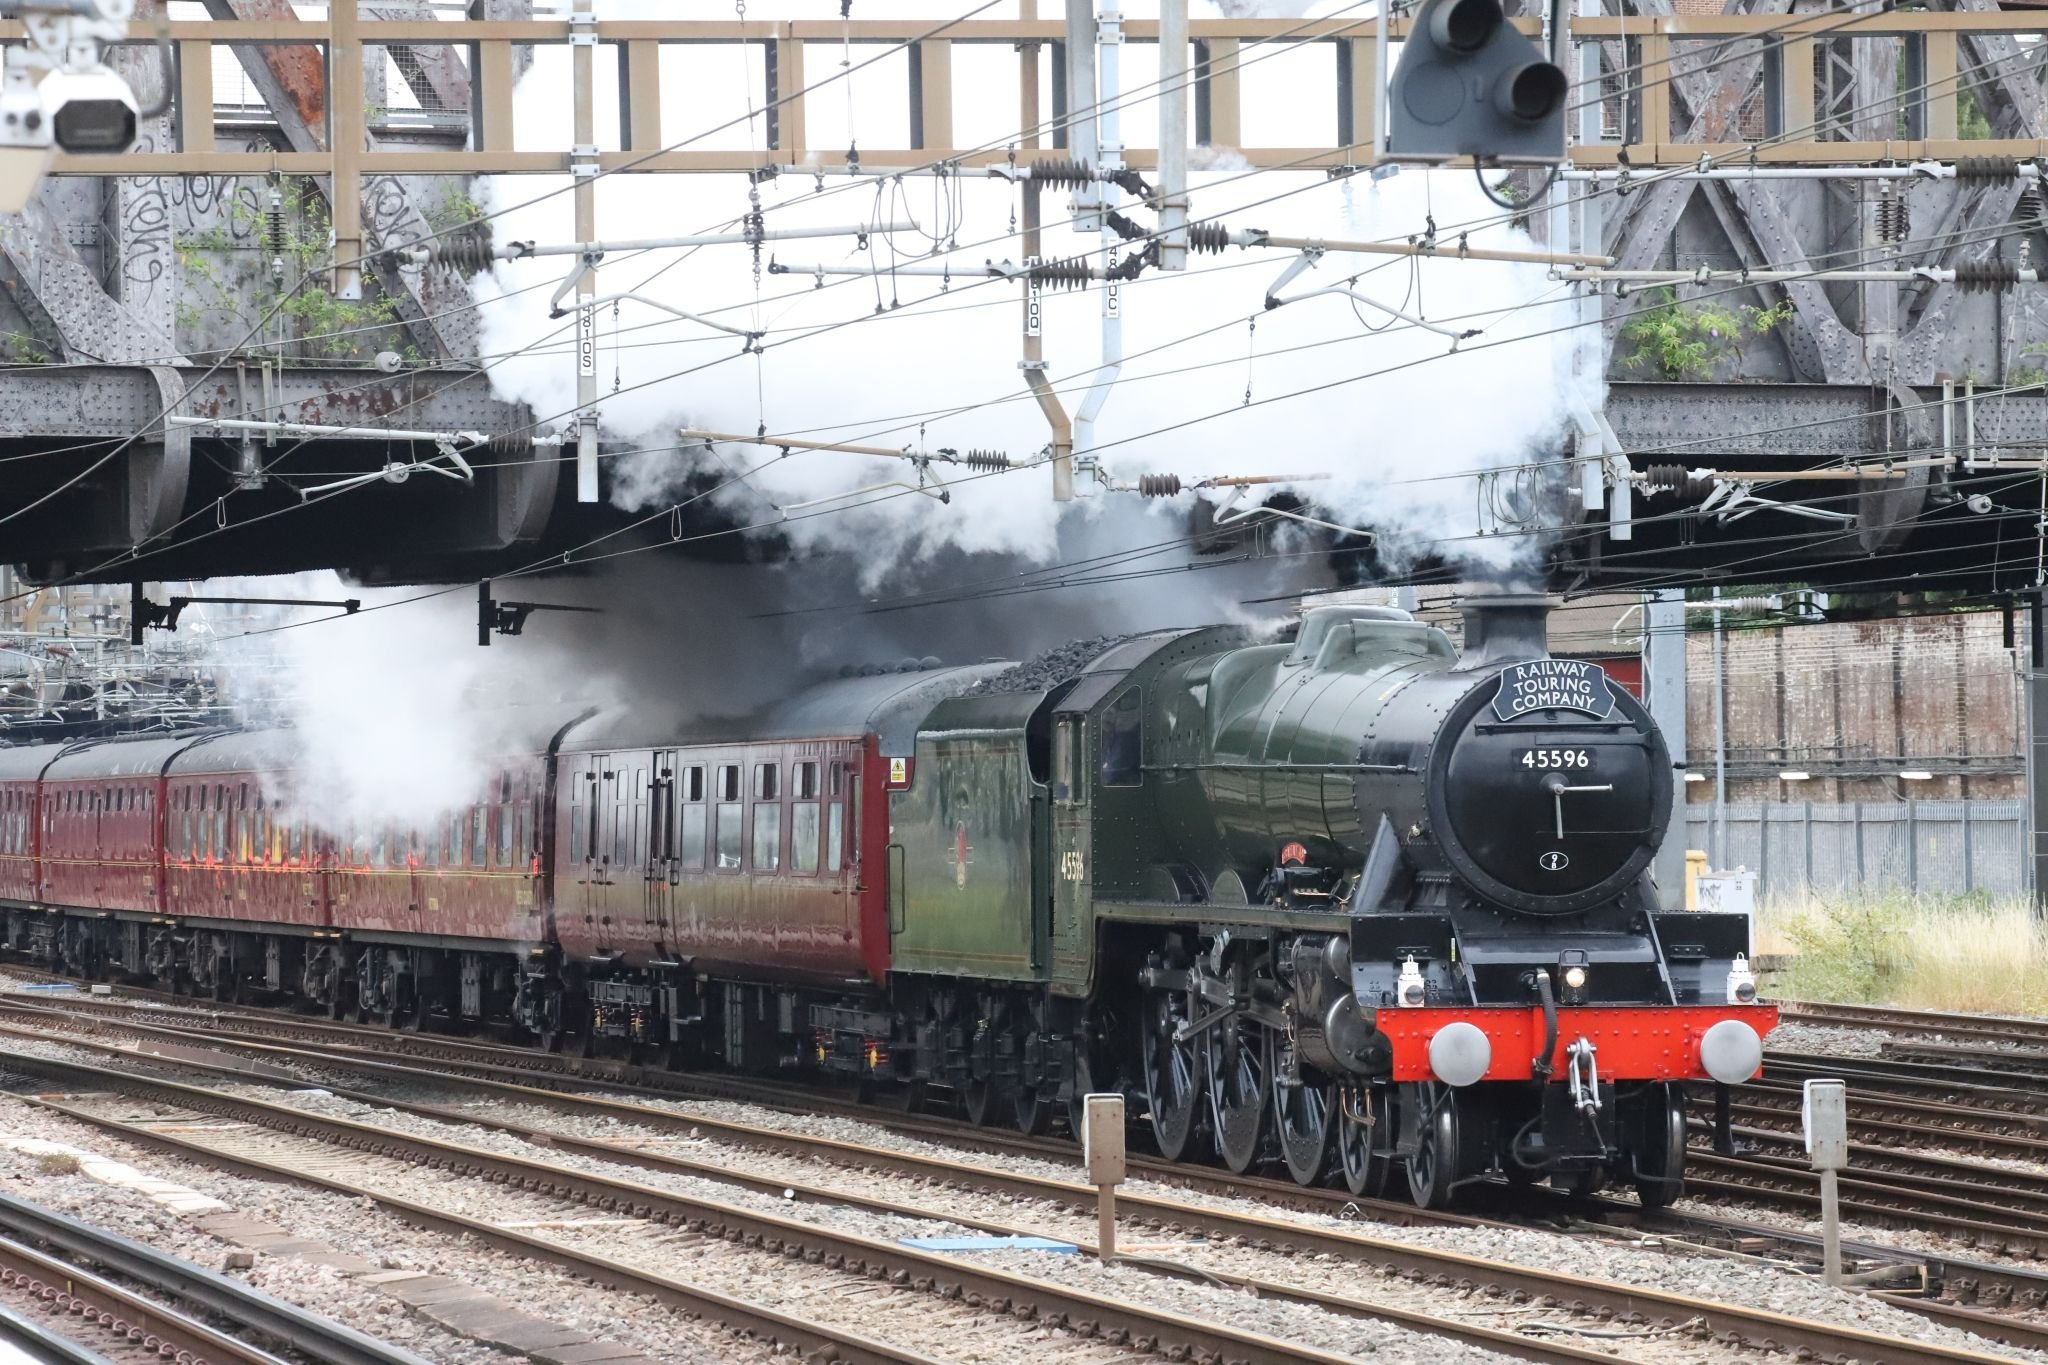 Ranelagh Bridge. LMS Jubilee class steam locomotive 45596 "Bahamas" in BR livery passing Royal Oak London Underground railway station at 07:05 on 22-Jul-2022 hauling The Railway Touring Company's "West Somerset Steam Express" to Minehead.